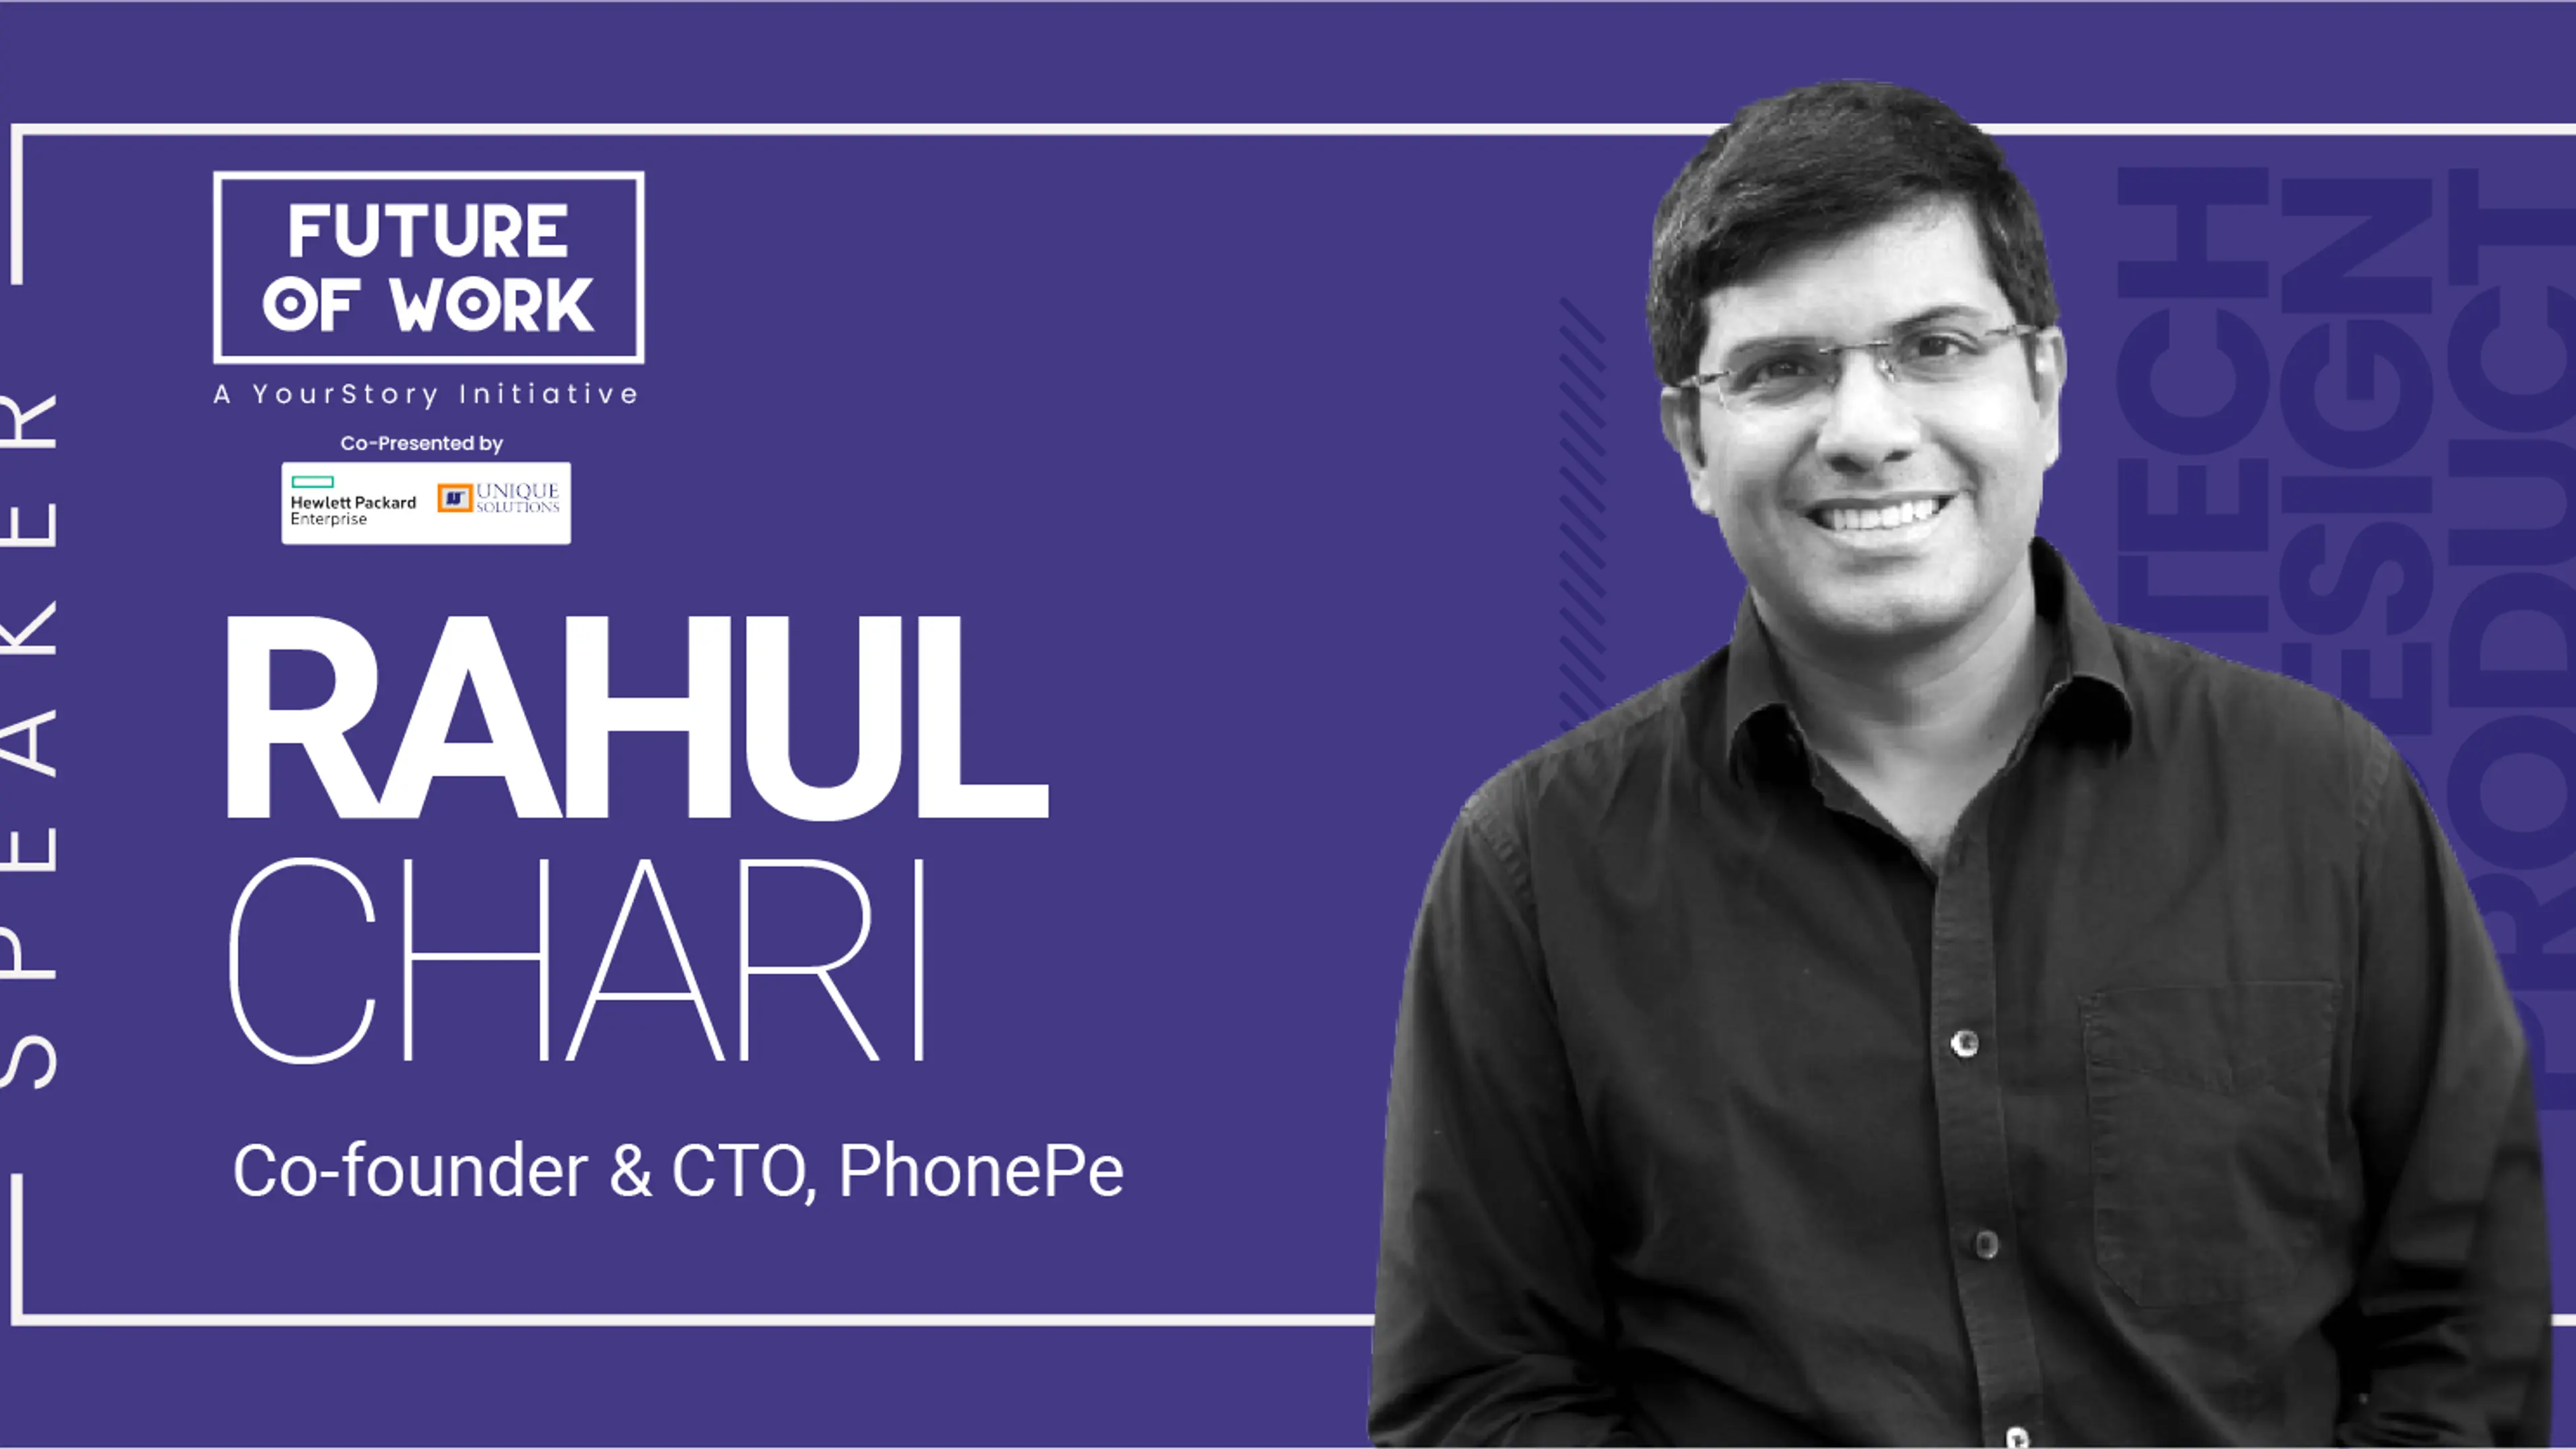 Future of Work: Pandemic lessons, govt intervention, and advice for young founders - everything PhonePe's Rahul Chari spoke about